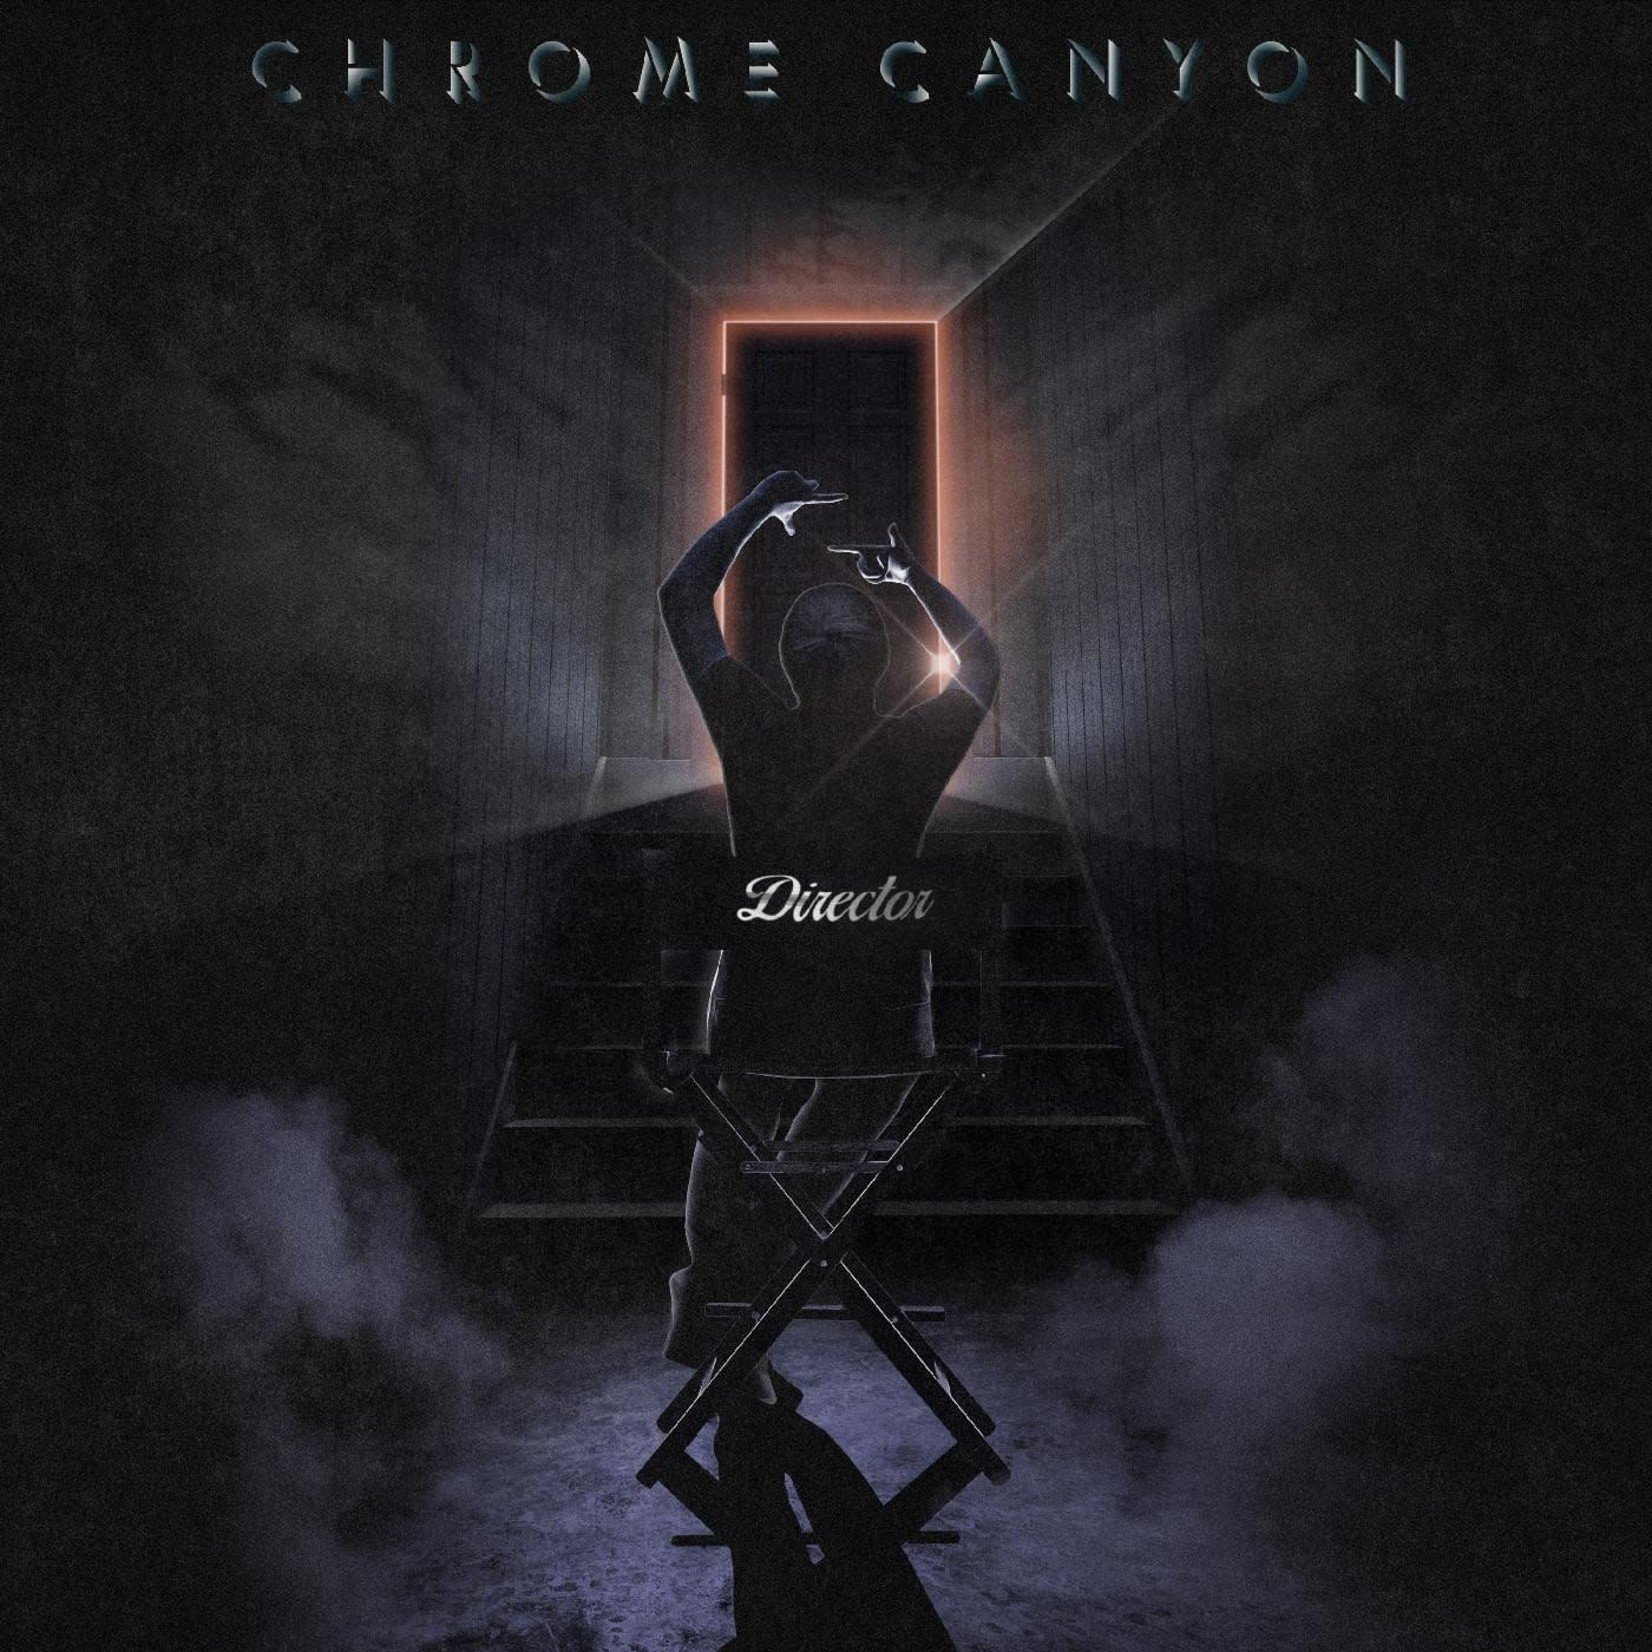 [New] Chrome Canyon - Director